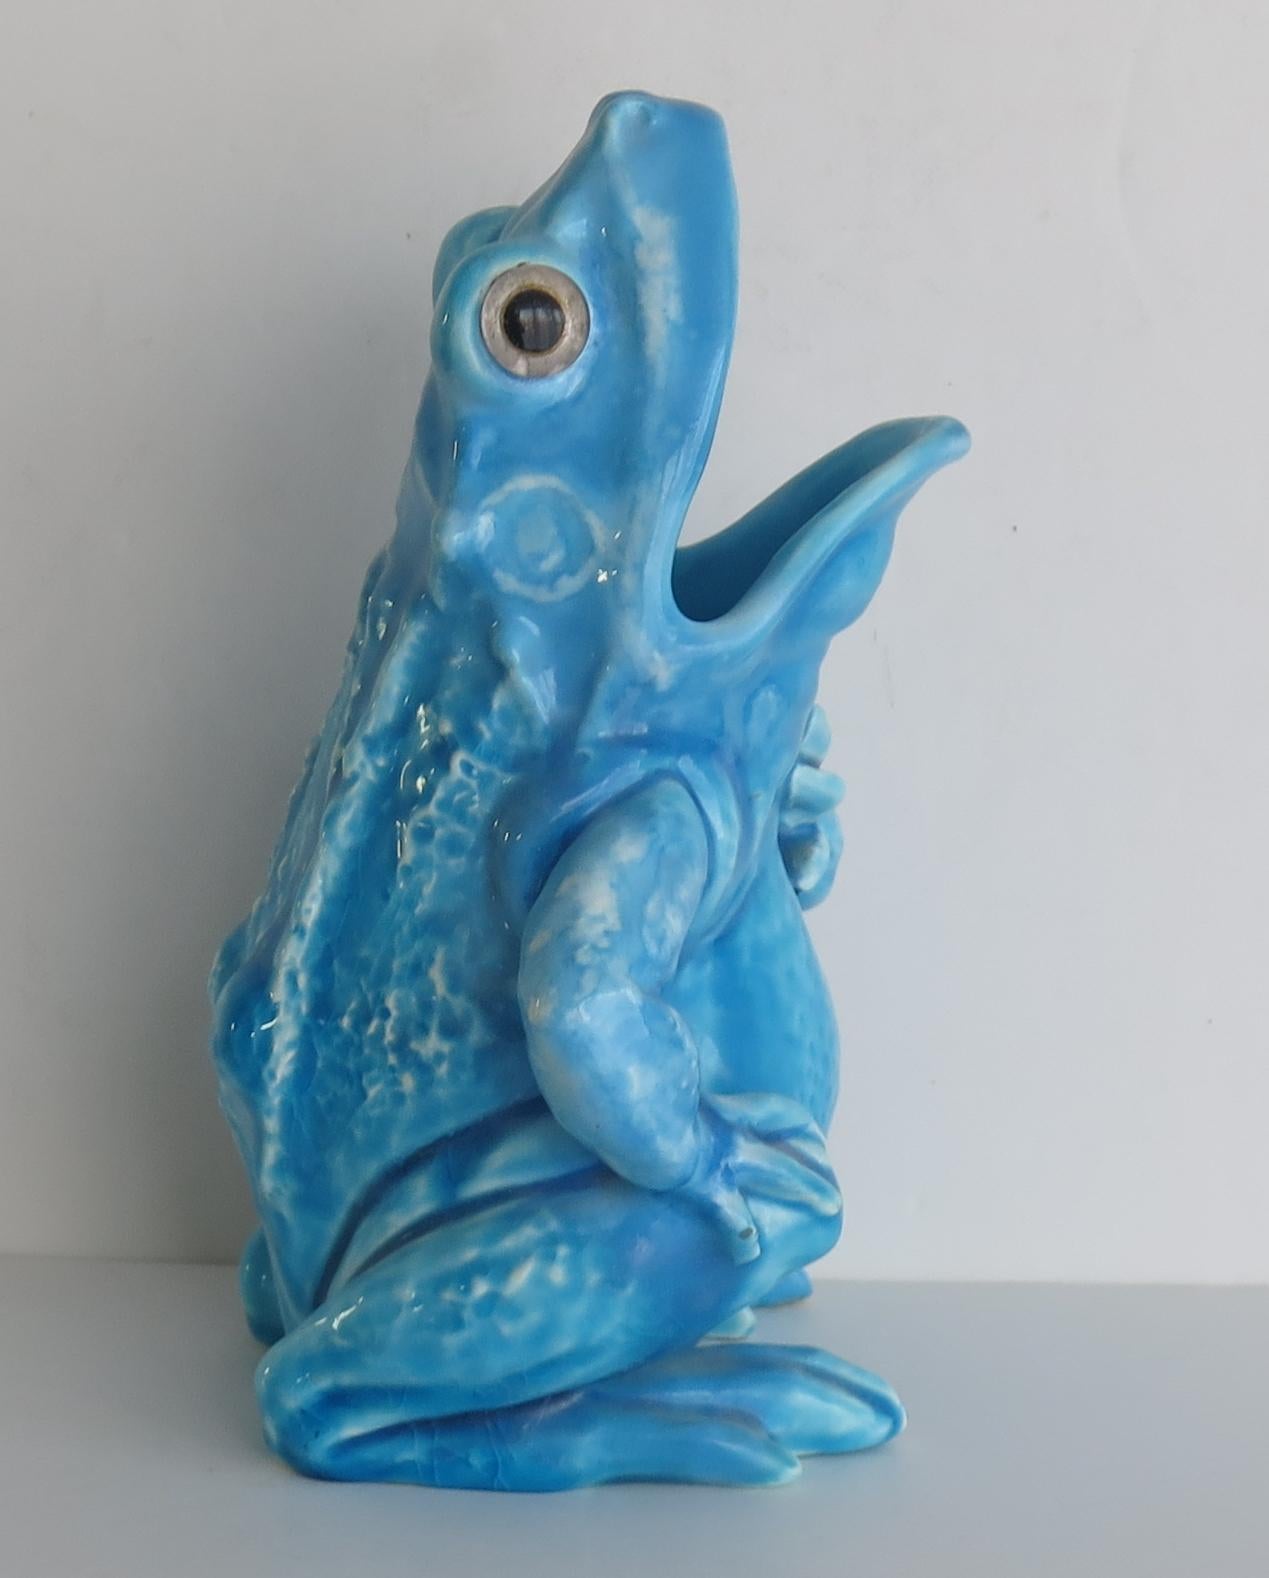 This is a pottery Spoon Warmer modelled as a Bull Frog, in the style of Burmantofts Art Pottery, England, dating to the late 19th century.

This grotesque animal sculpture is modelled as a scaly Bull Frog, covered in a blue/turquoise glaze and